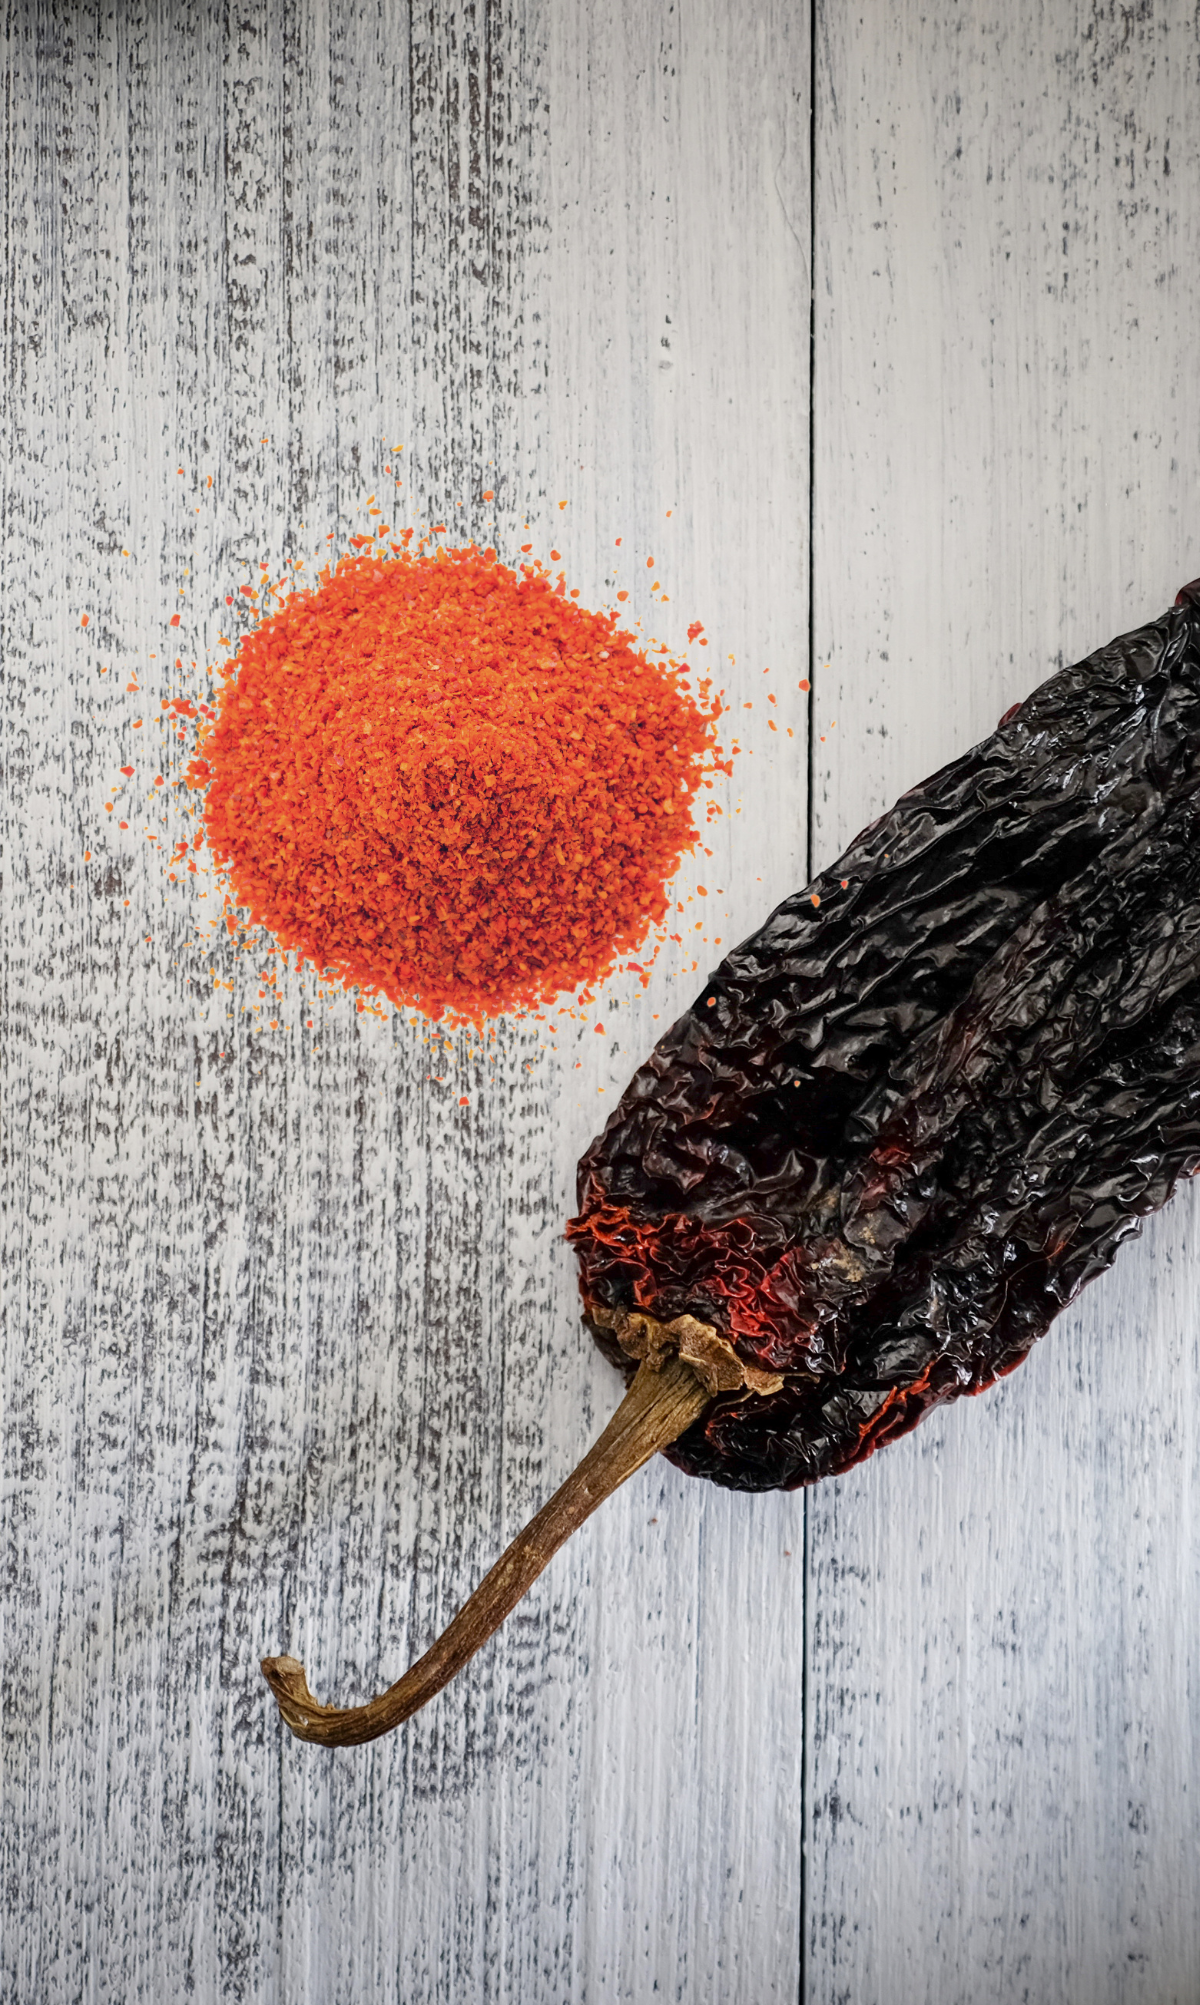 Satisfy Your Cravings with the Best Ancho Chili Powder